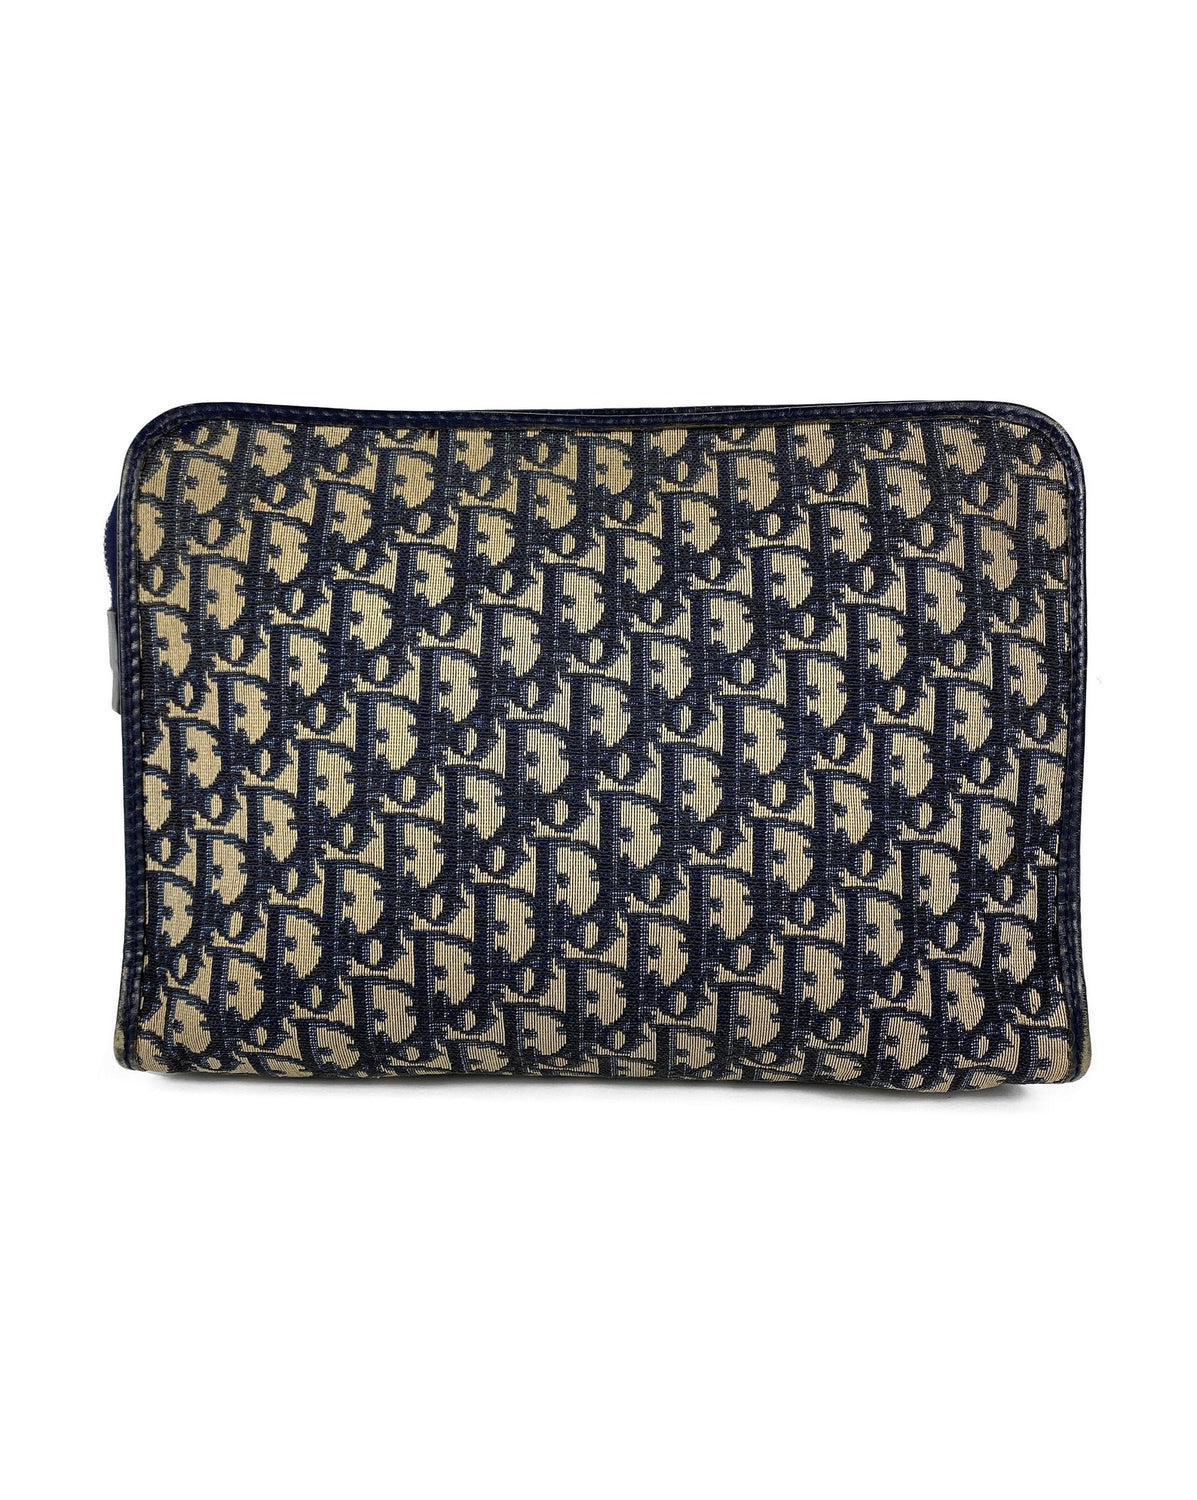 FRUIT Vintage Christian Dior 1980s navy trotter oblique monogram clutch bag. Features a classic pochette style shape with top zipper, internal pockets and vinyl lining.